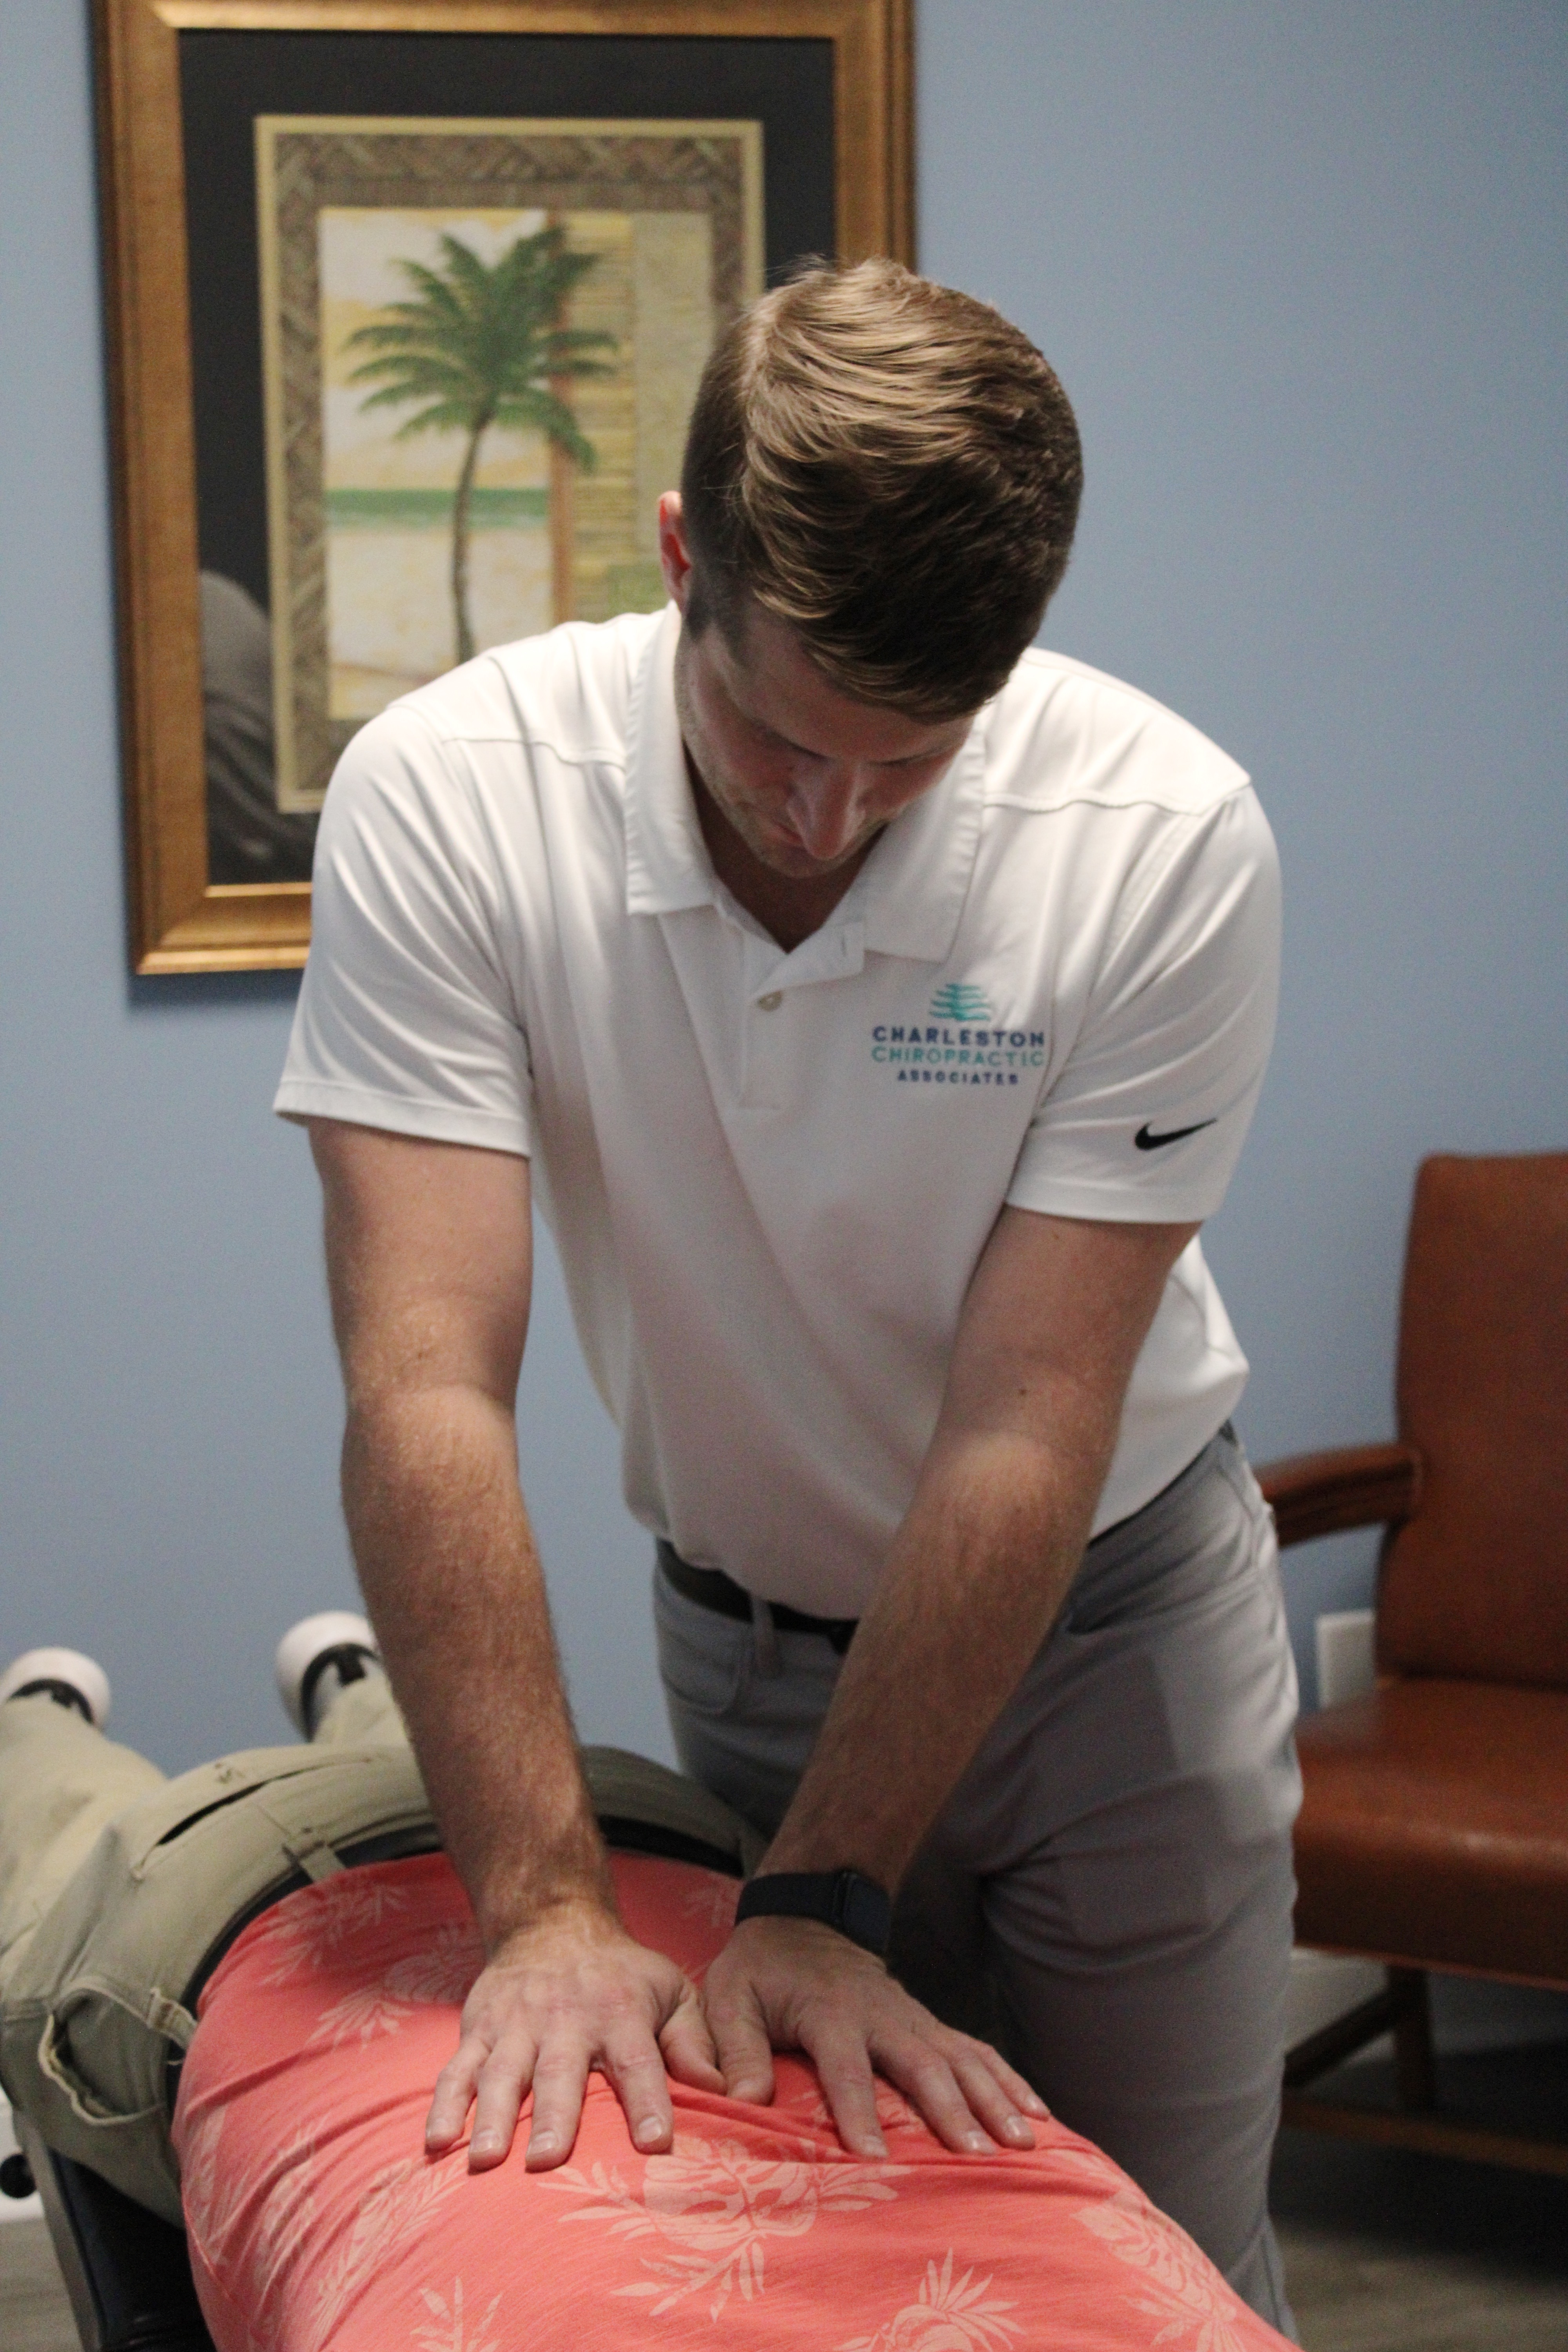 Chiropractic adjustment, lowcountry chiropractor, benefits of chiropractic care, back pain relief